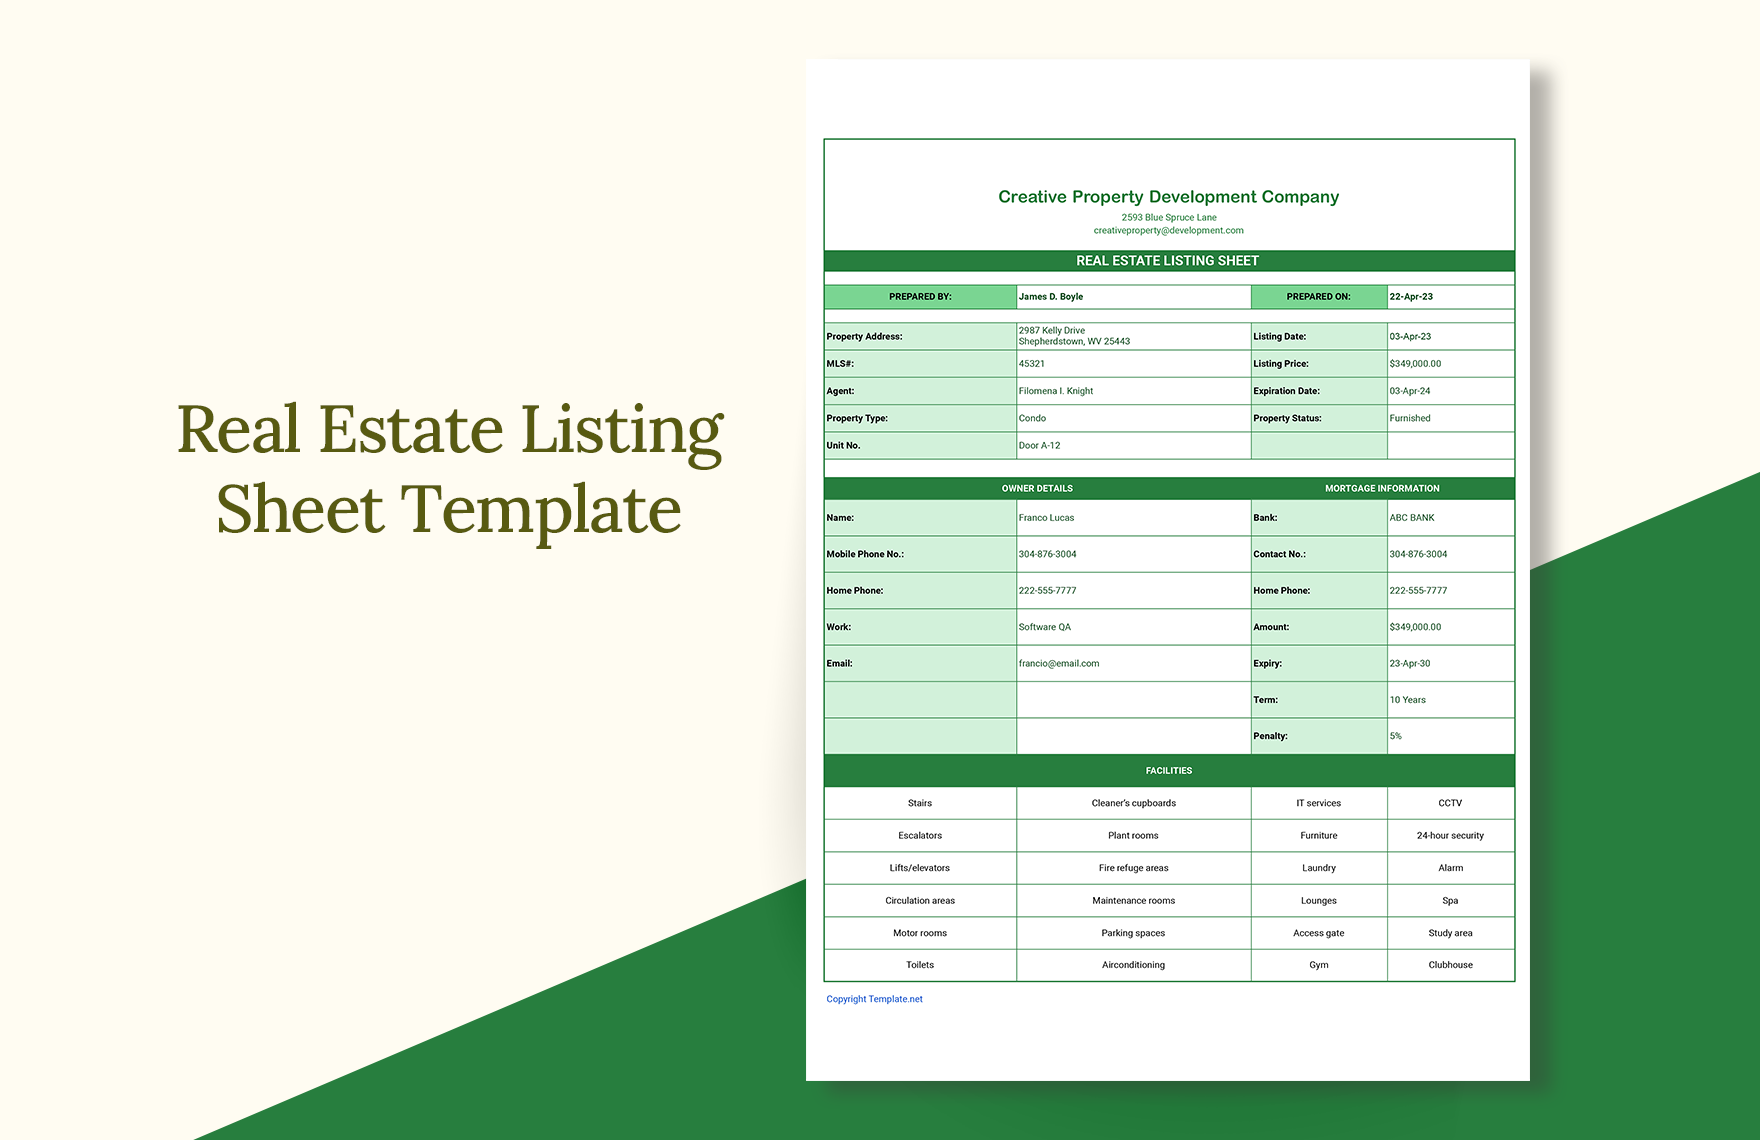 Real Estate Listing Sheet Template in Excel, PDF, Google Sheets, Apple Numbers